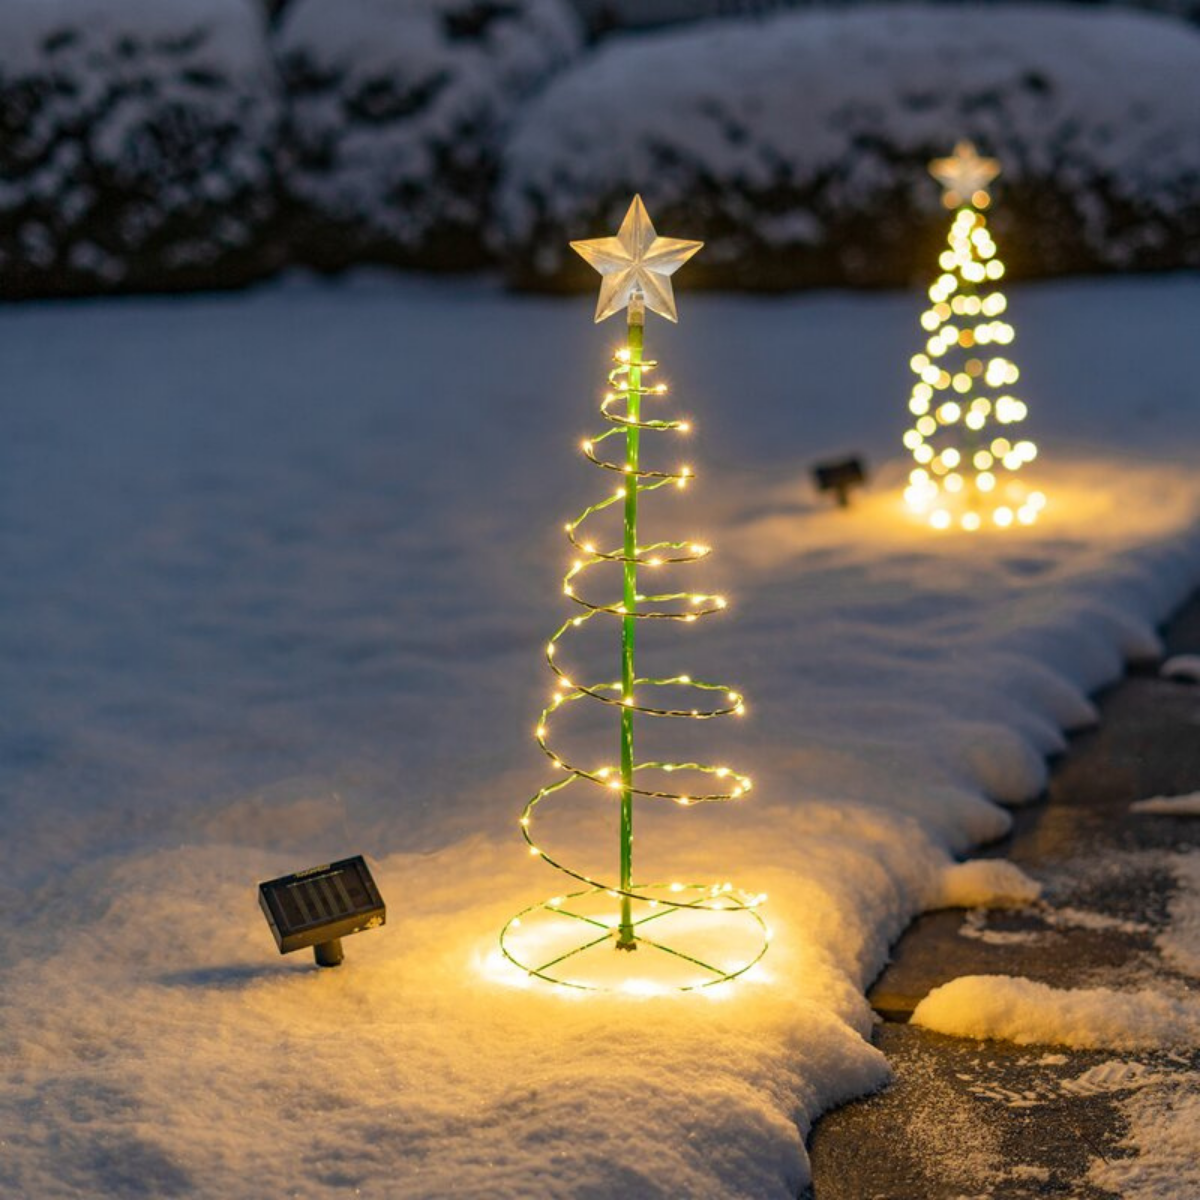 Outdoor Christmas Decorations Top 70+ Christmas Decoration Ideas - 16